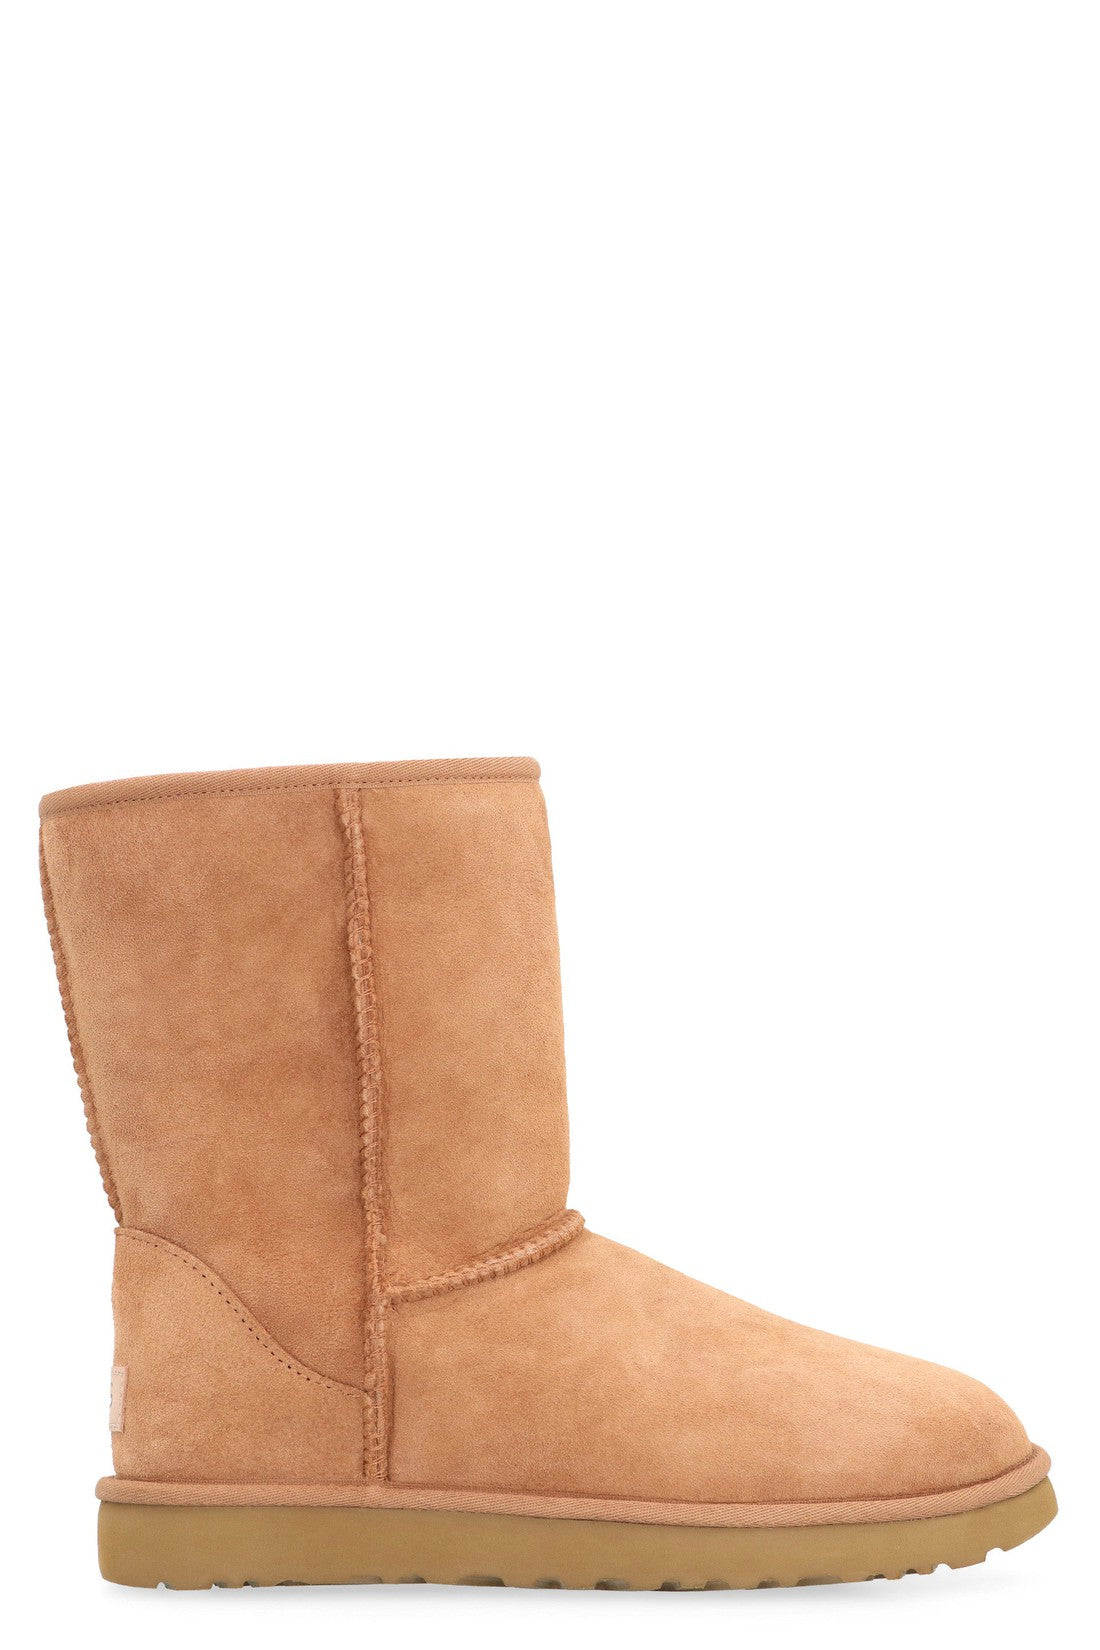 UGG-OUTLET-SALE-Classic Short II ankle boots-ARCHIVIST